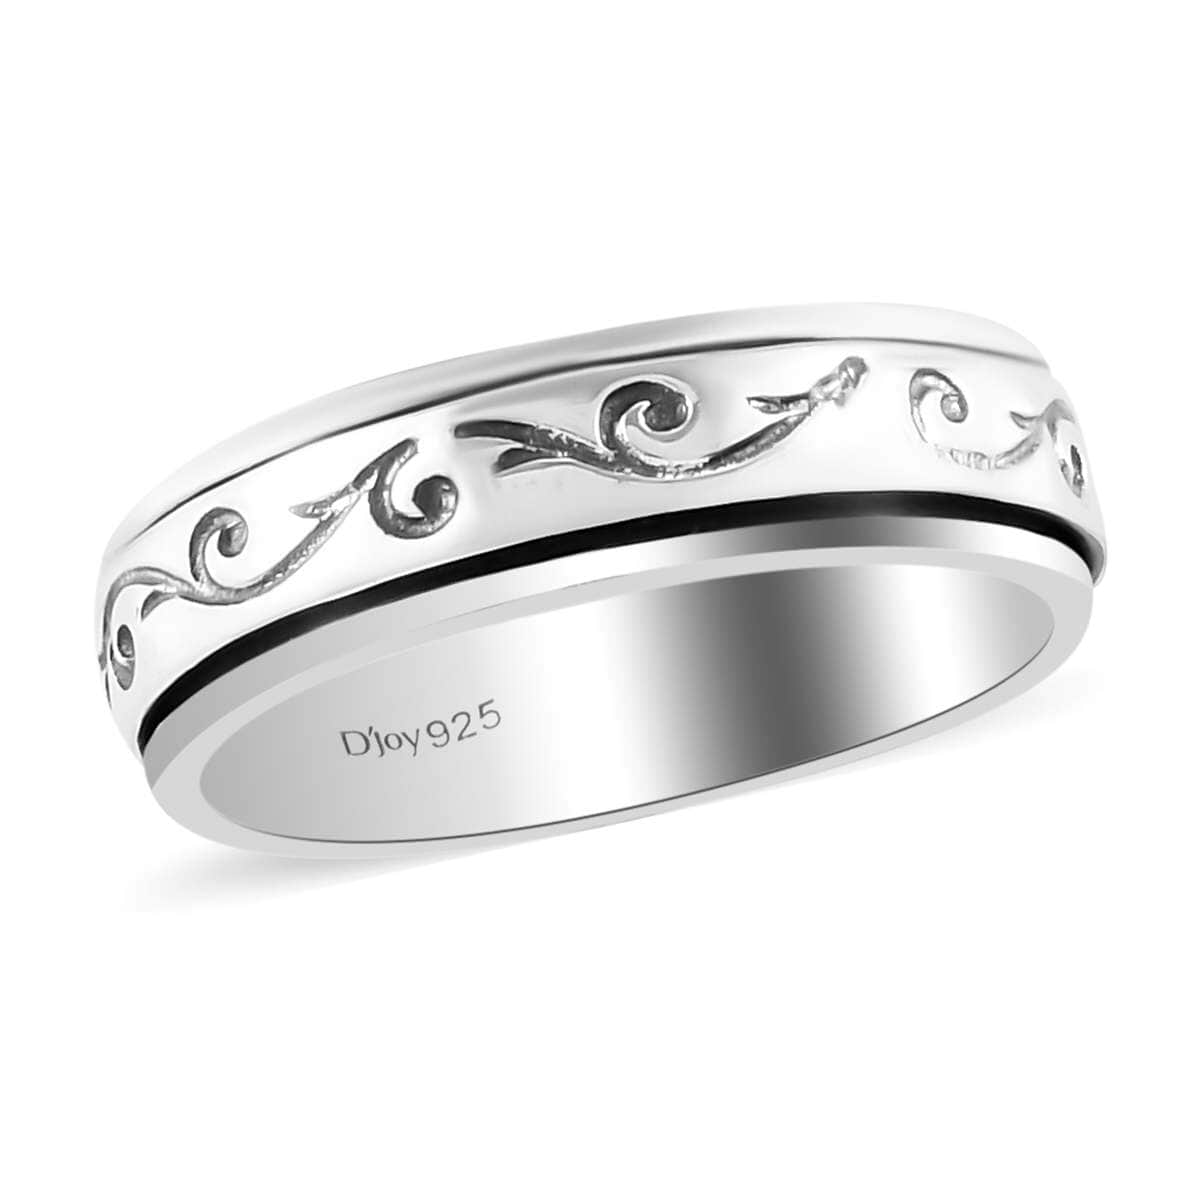 Vines Sterling Silver Spinner Ring, Anxiety Ring for Women, Fidget Rings for Anxiety, Stress Relieving Anxiety Ring (Size 5.0) image number 0